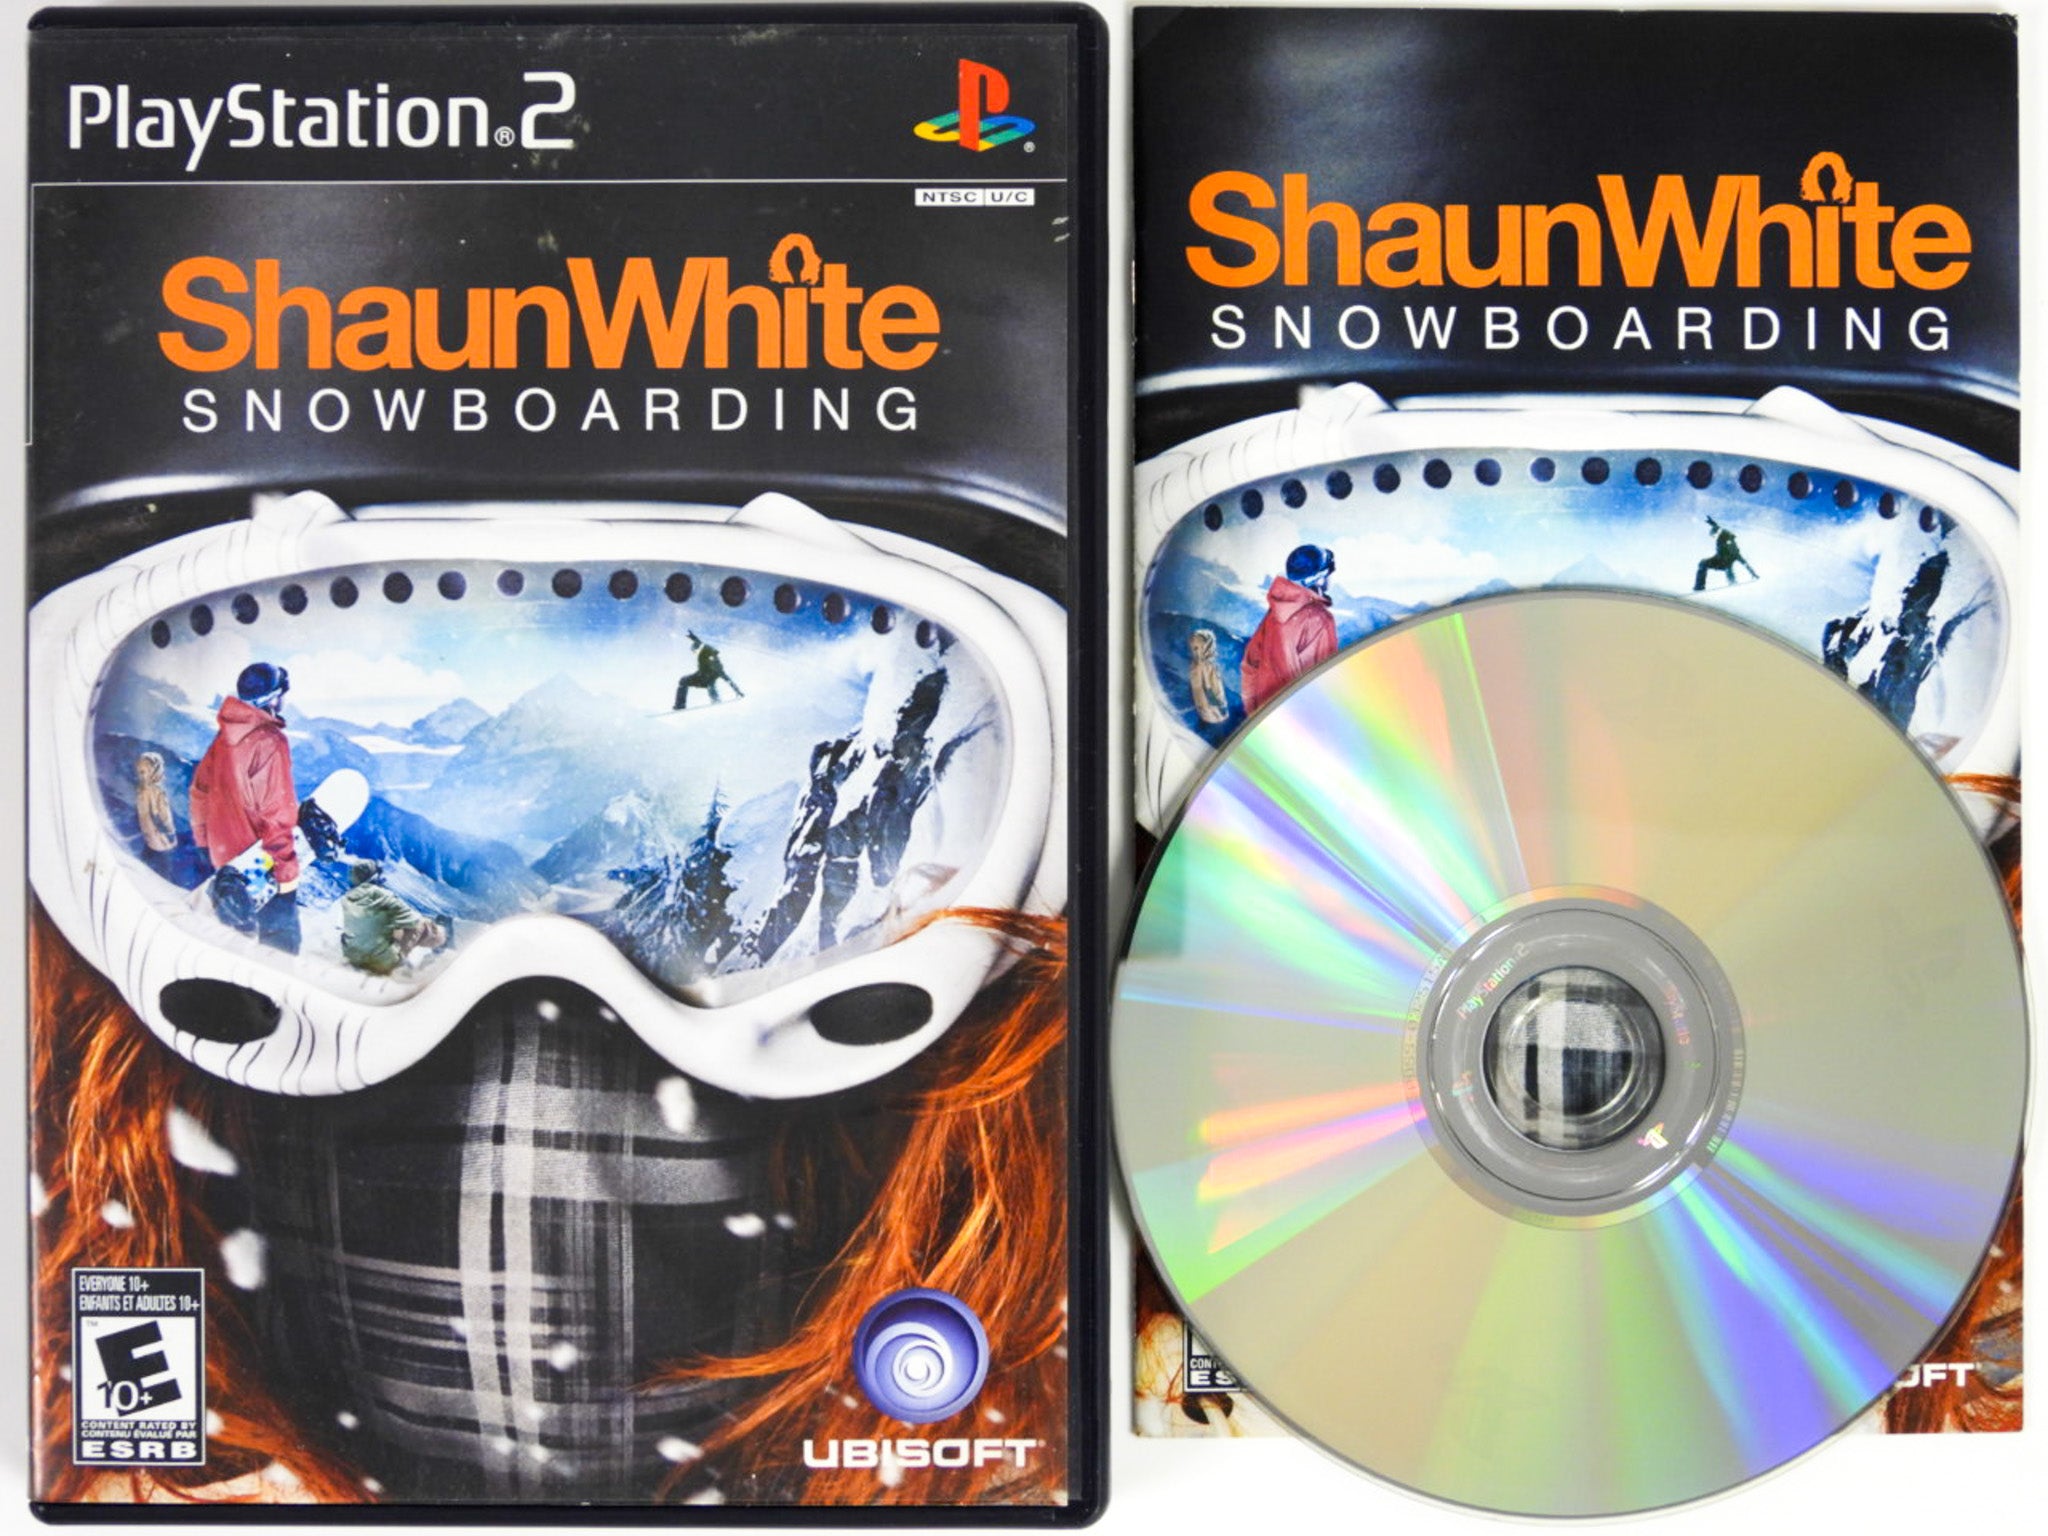 Shaun White Snowboarding - Playstation 2 PS2 Game - Disc Only